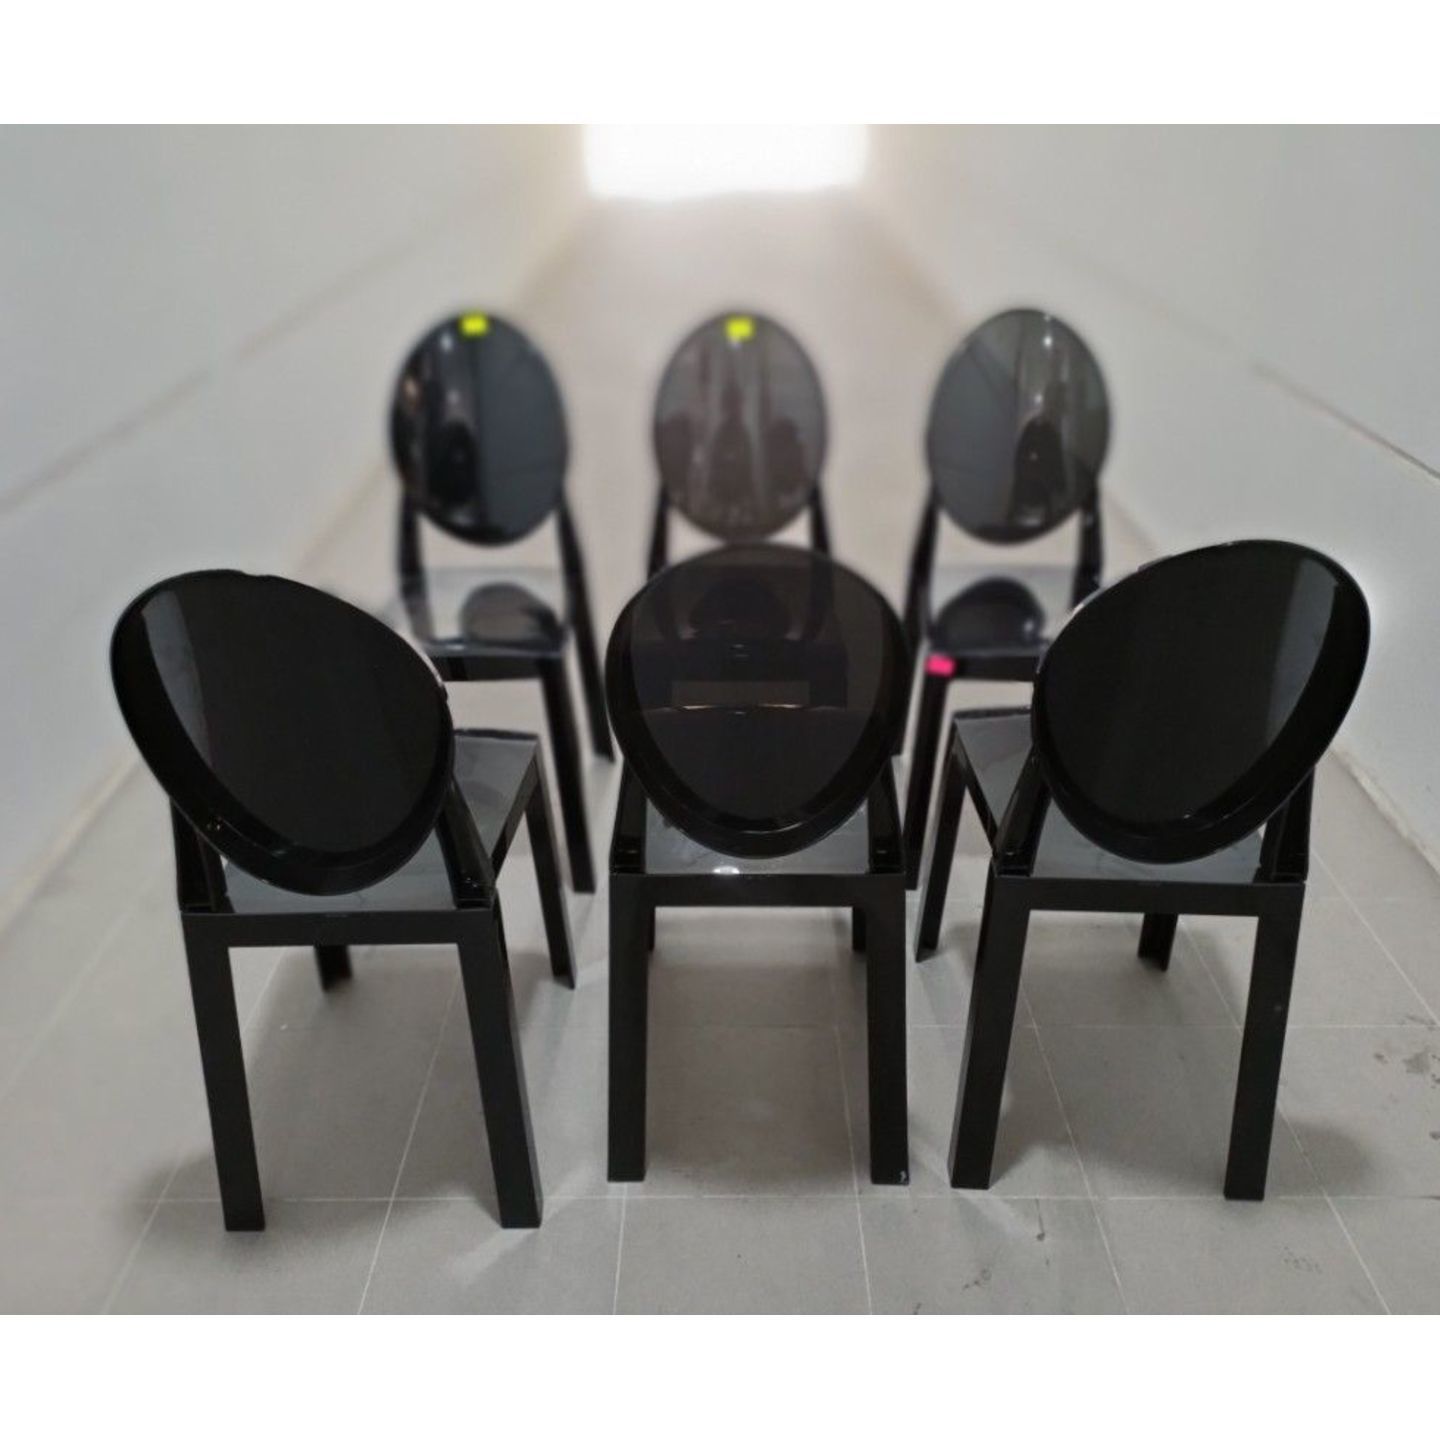 6pcs BLACK KRYPTON Dining Chairs (NON STACKABLE)